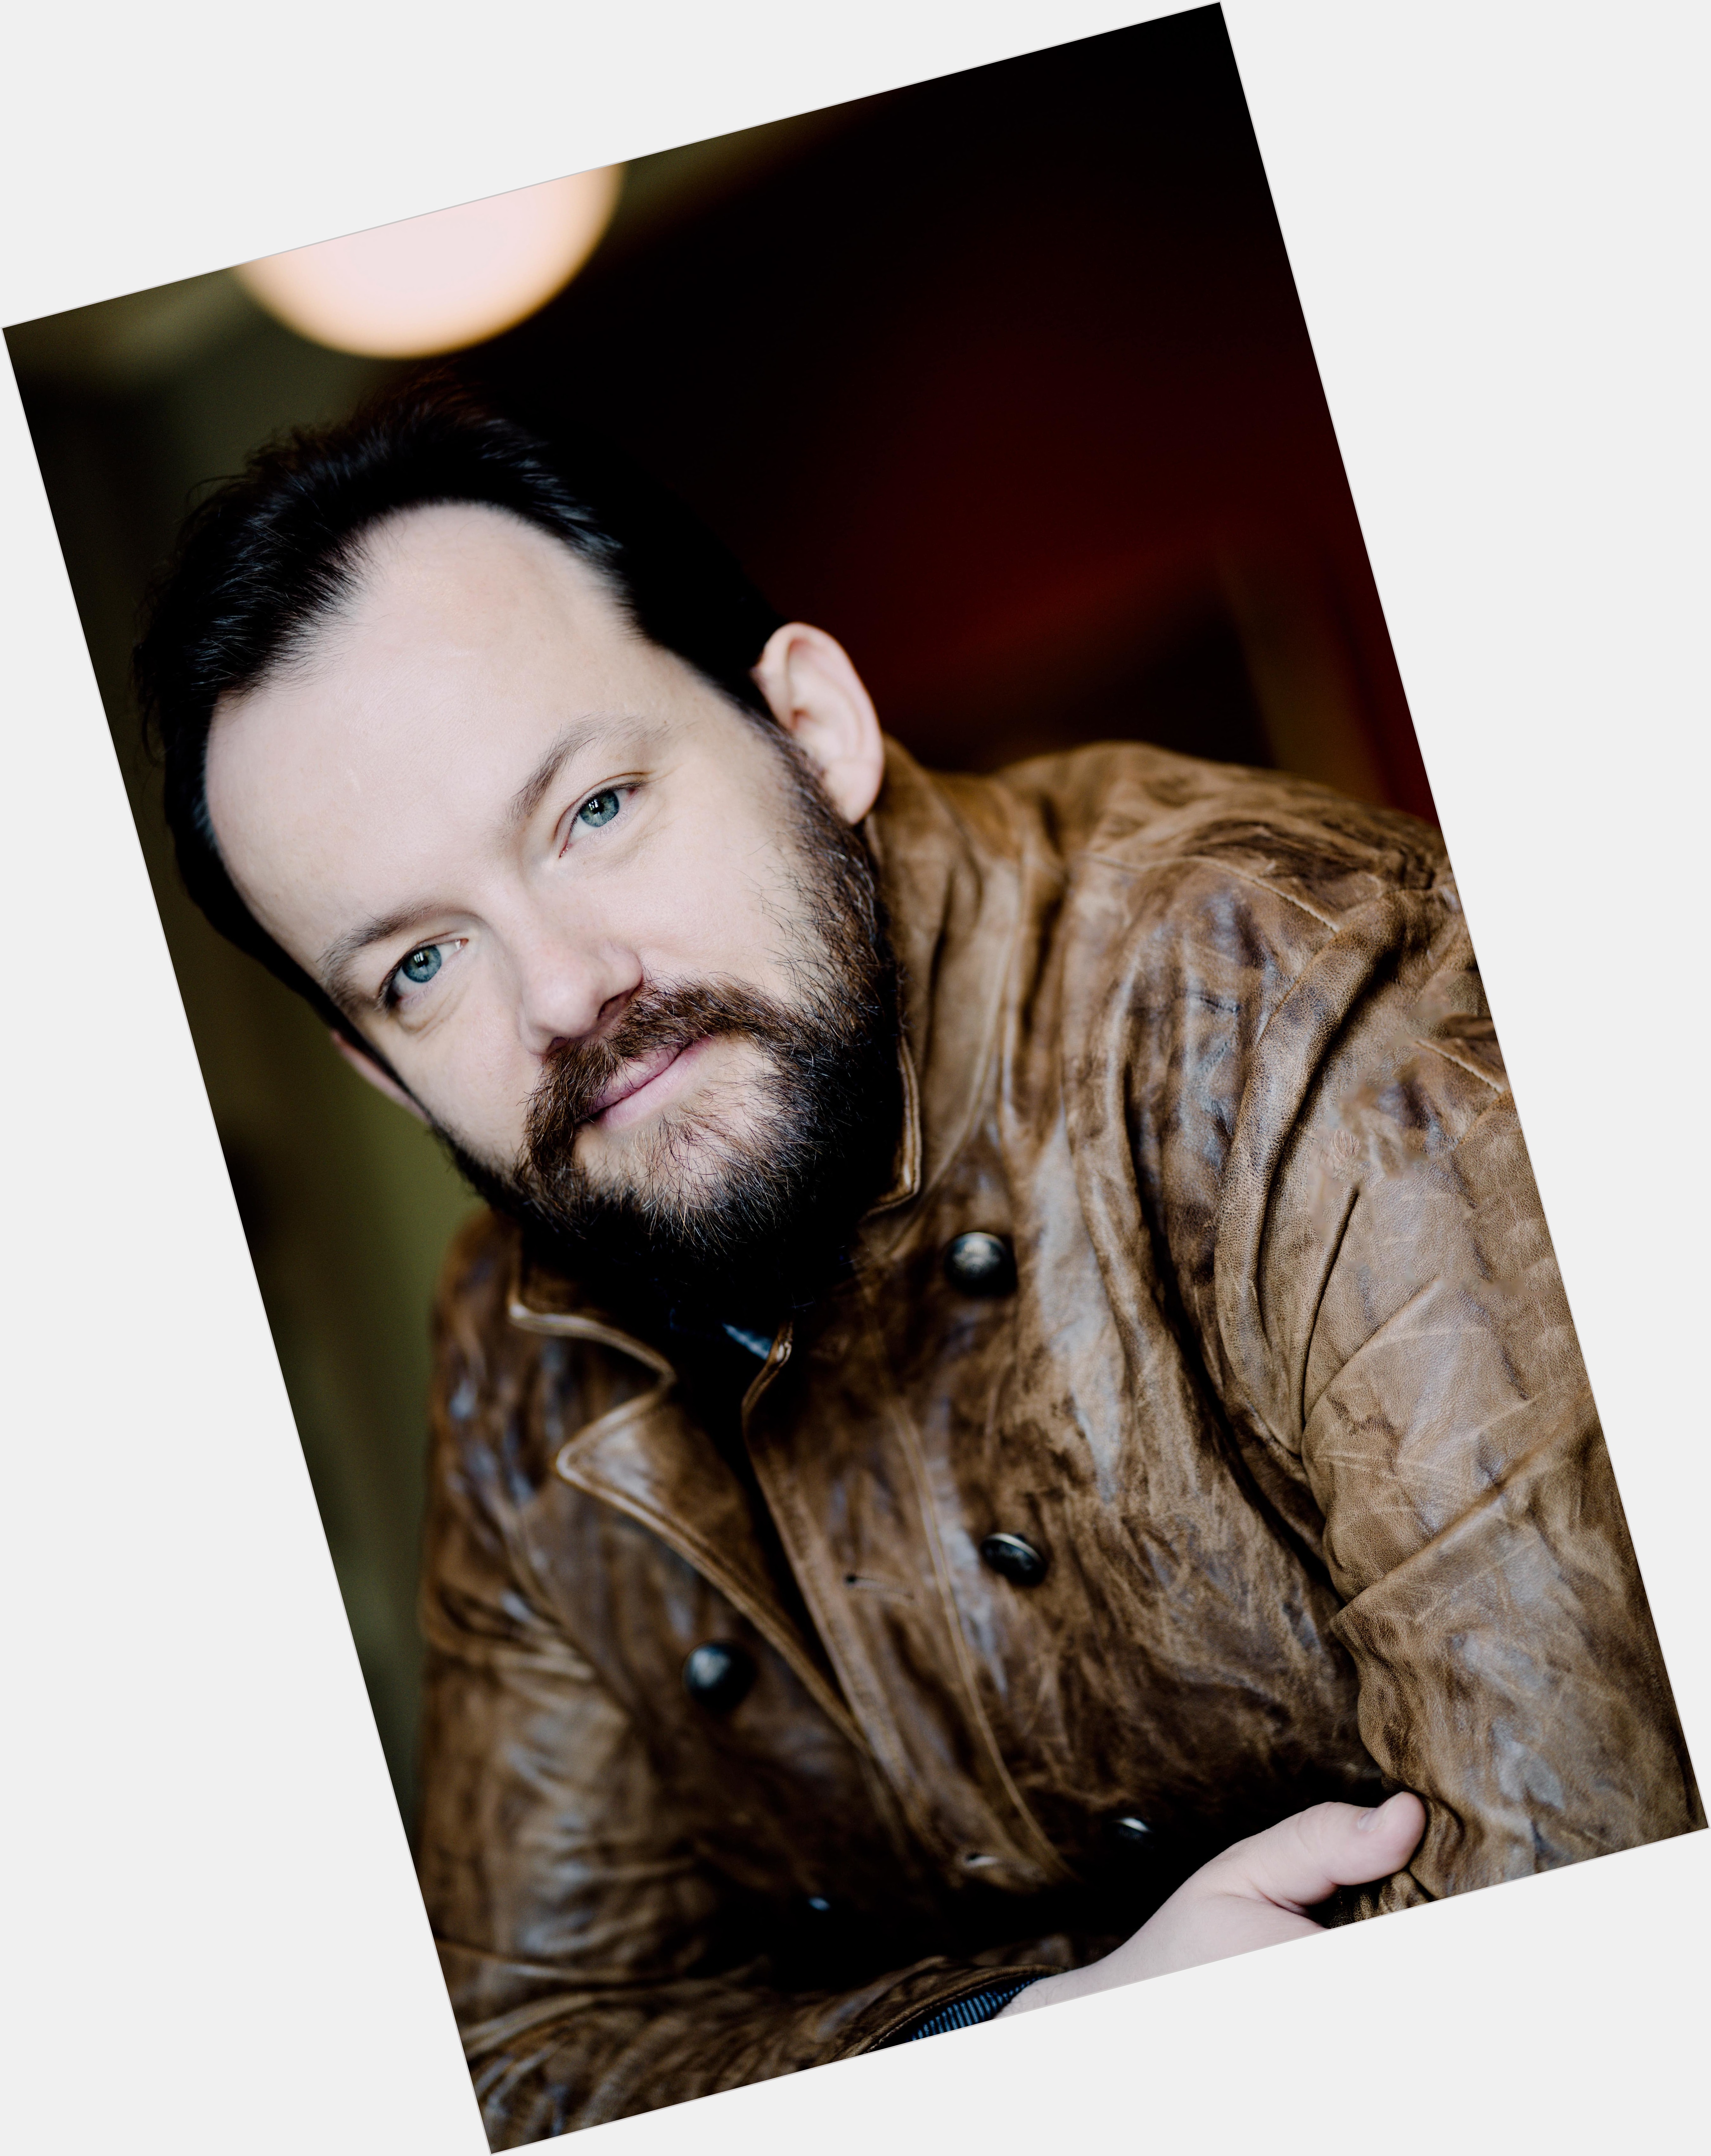 Andris Nelsons dating 2